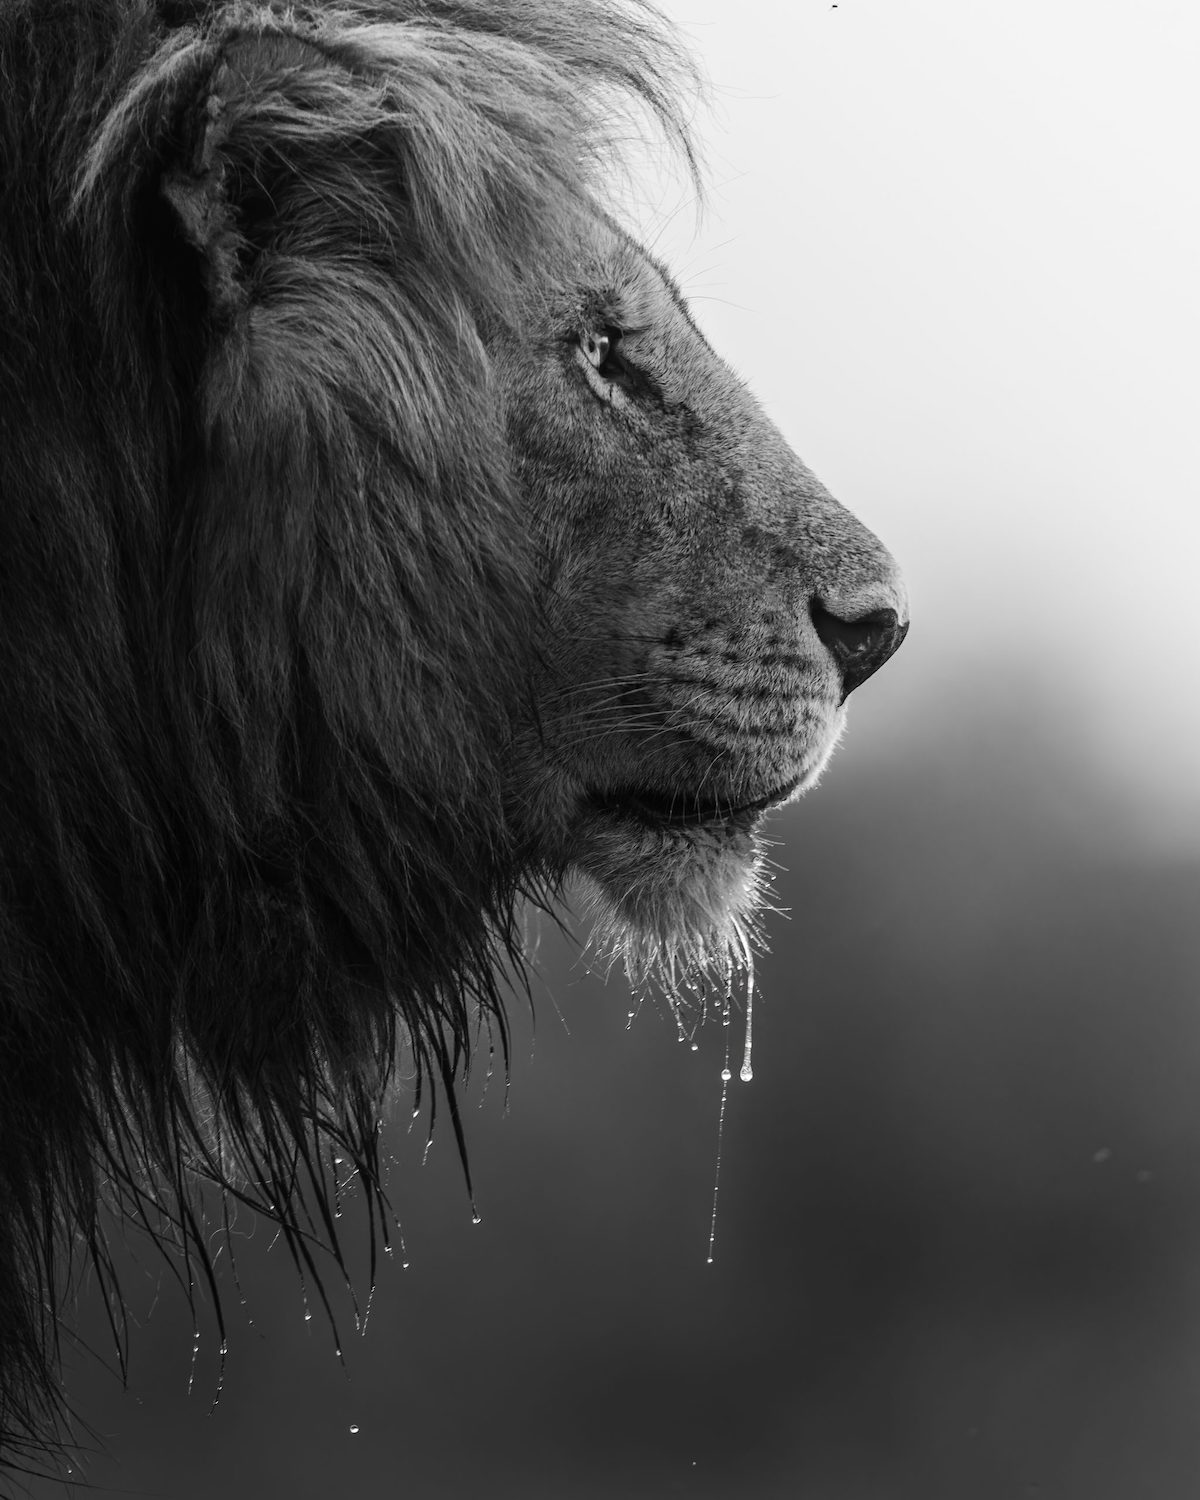 Lion with Water Dripping from Its Mane